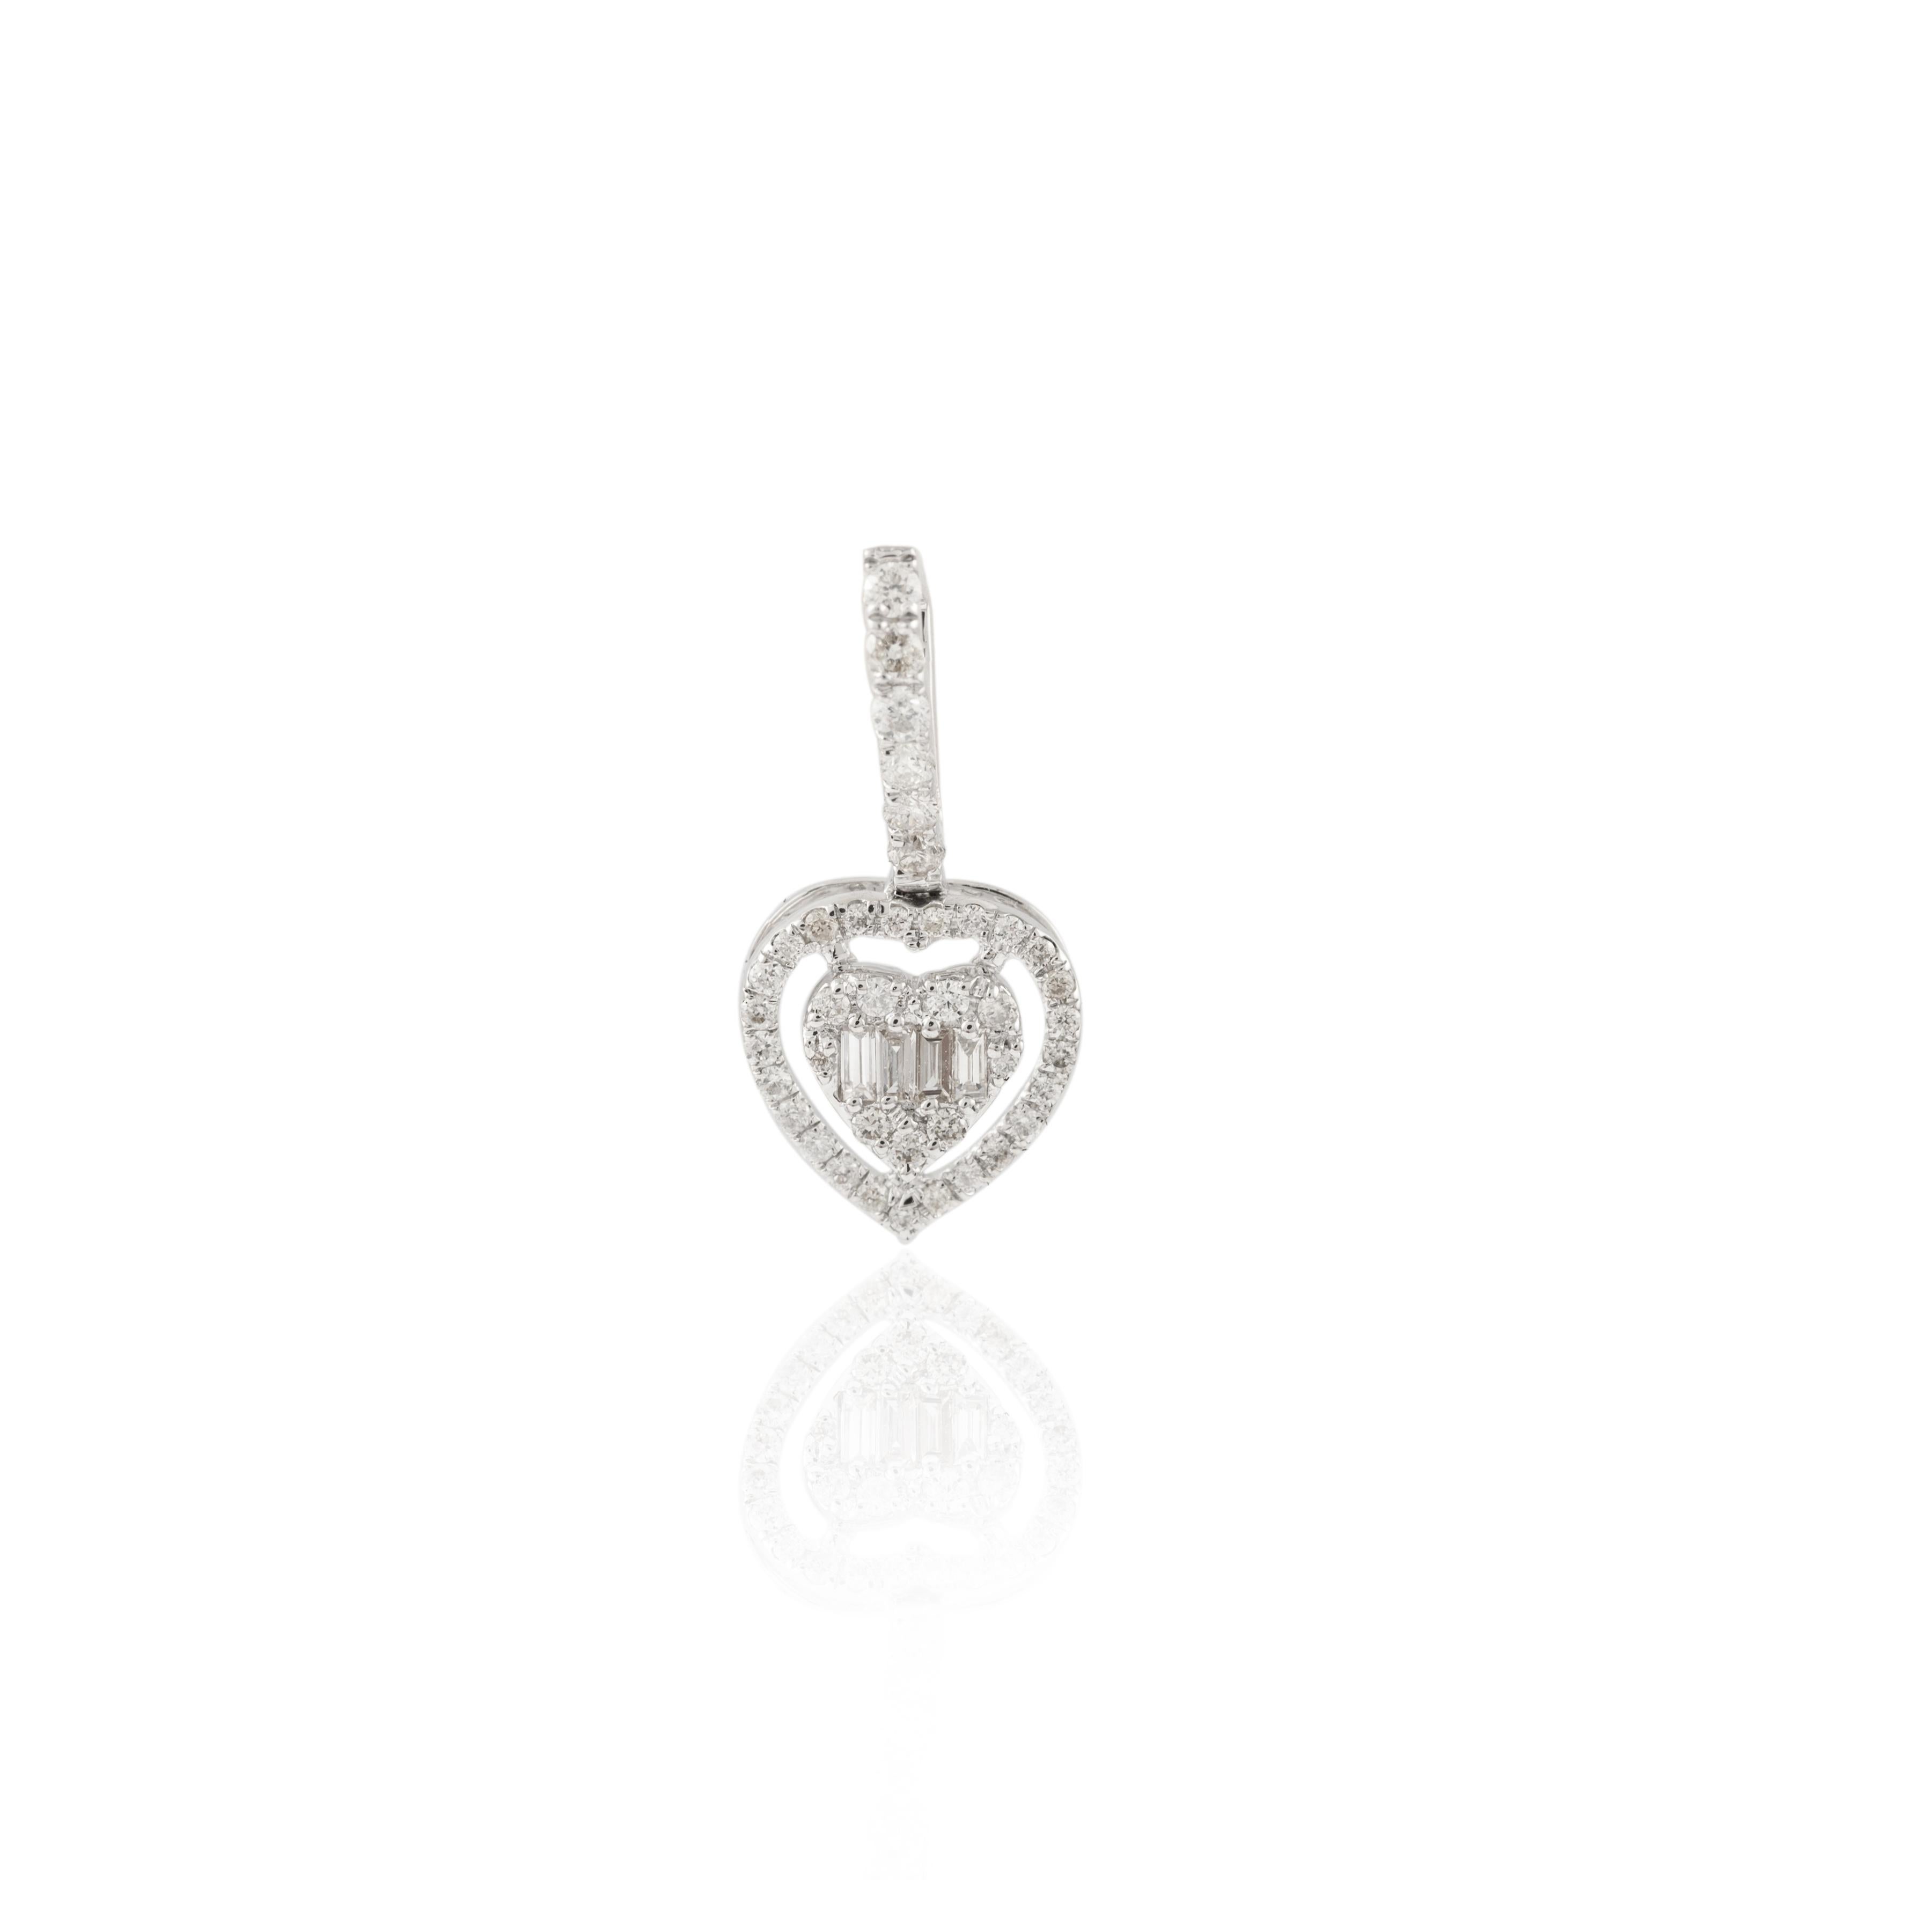 Women's Heart Diamond Pendant 18k Solid White Gold, Fine Jewelry Bride To Be Gift For Sale